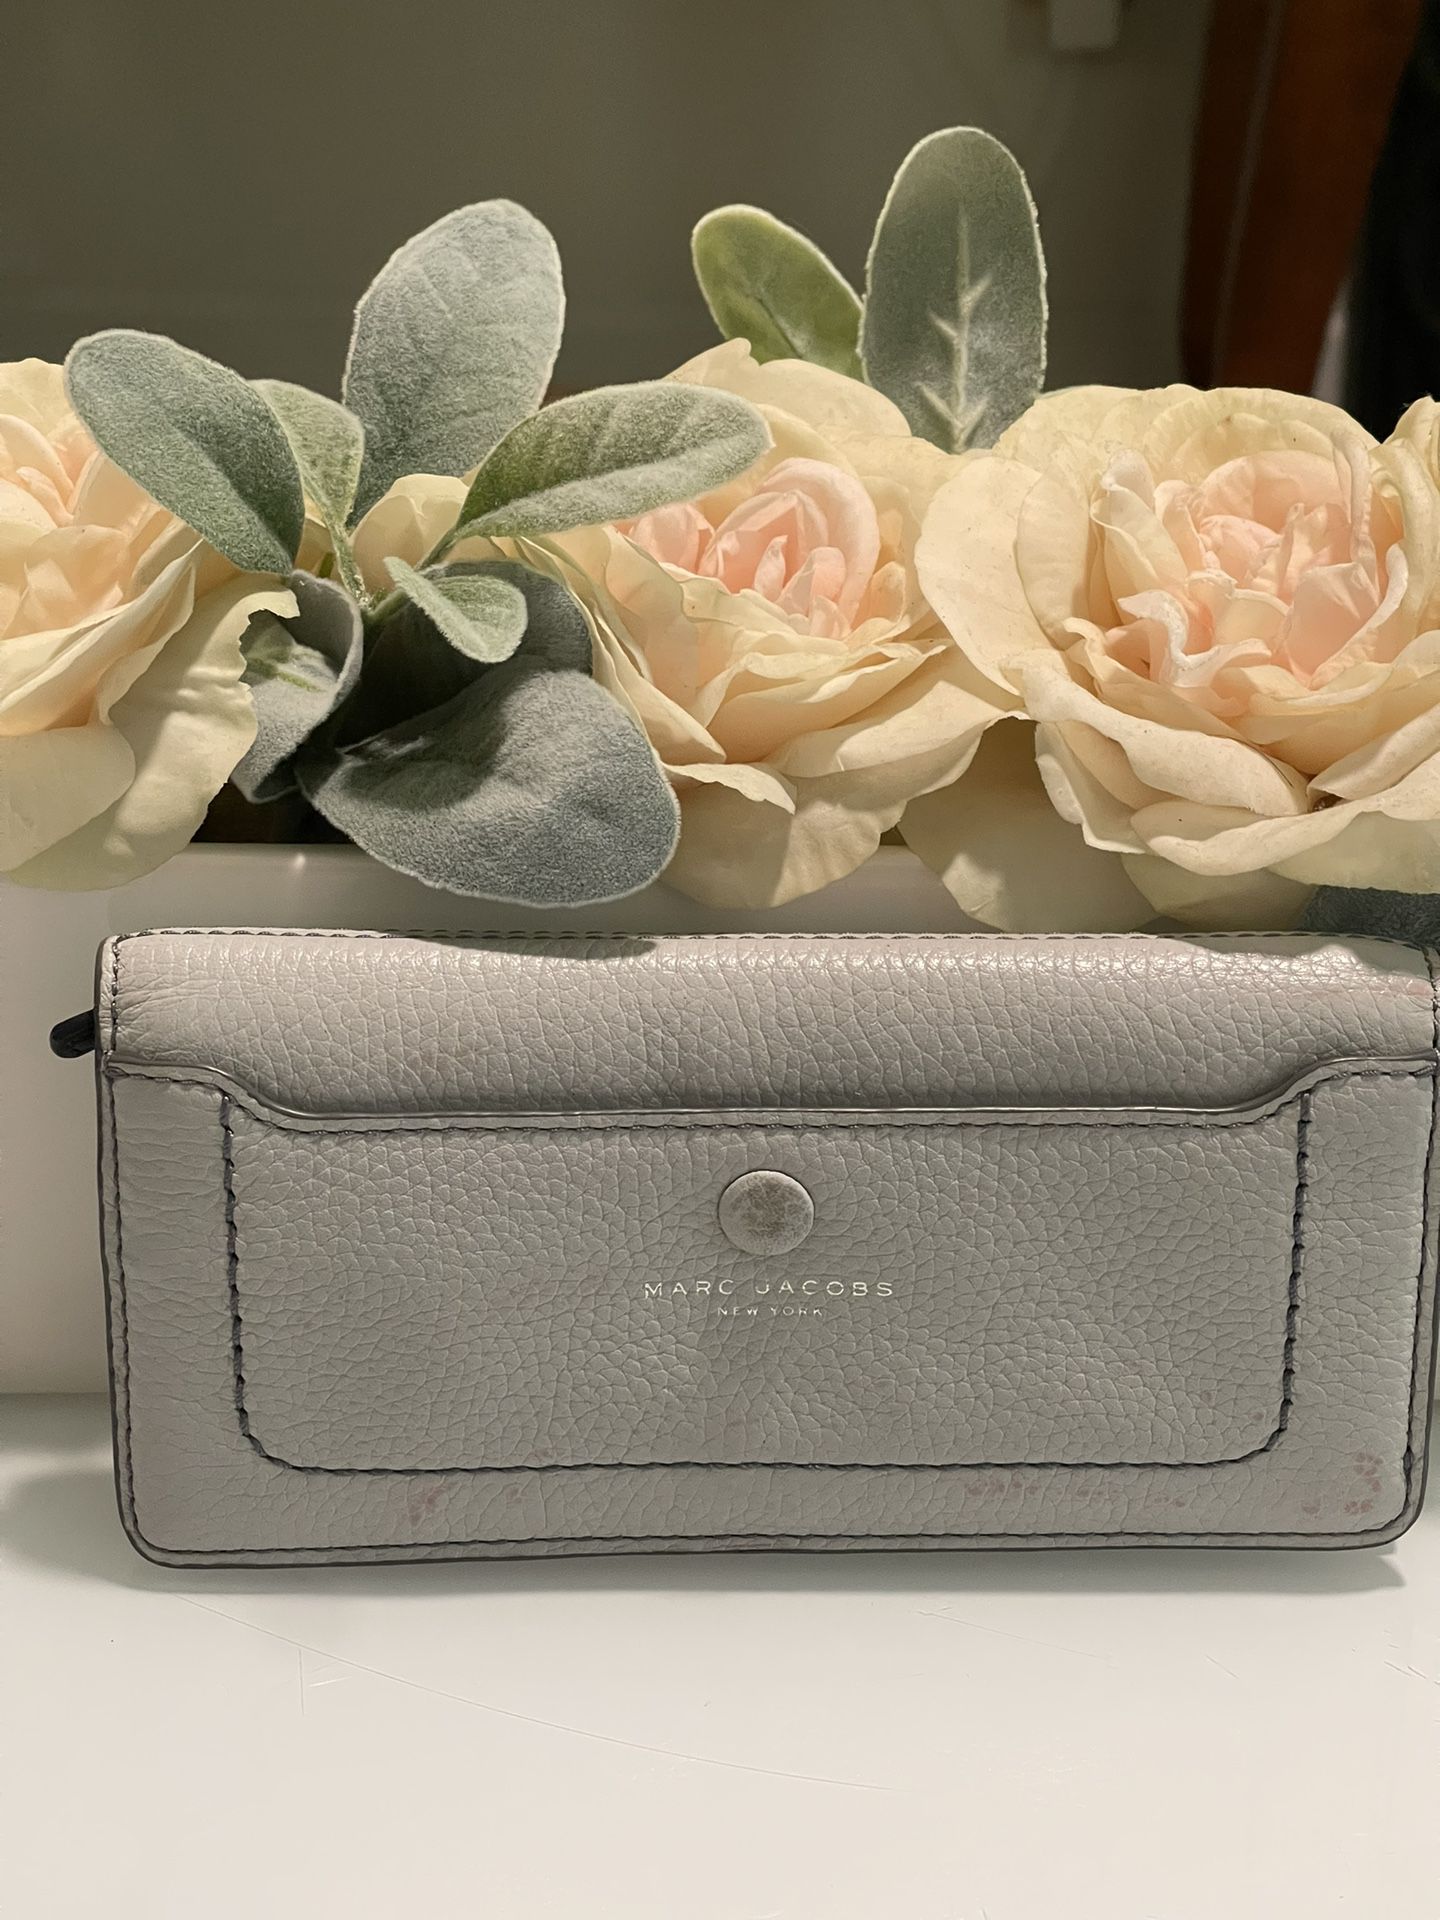 Marc Jacobs New York Wallet Gray Silver 